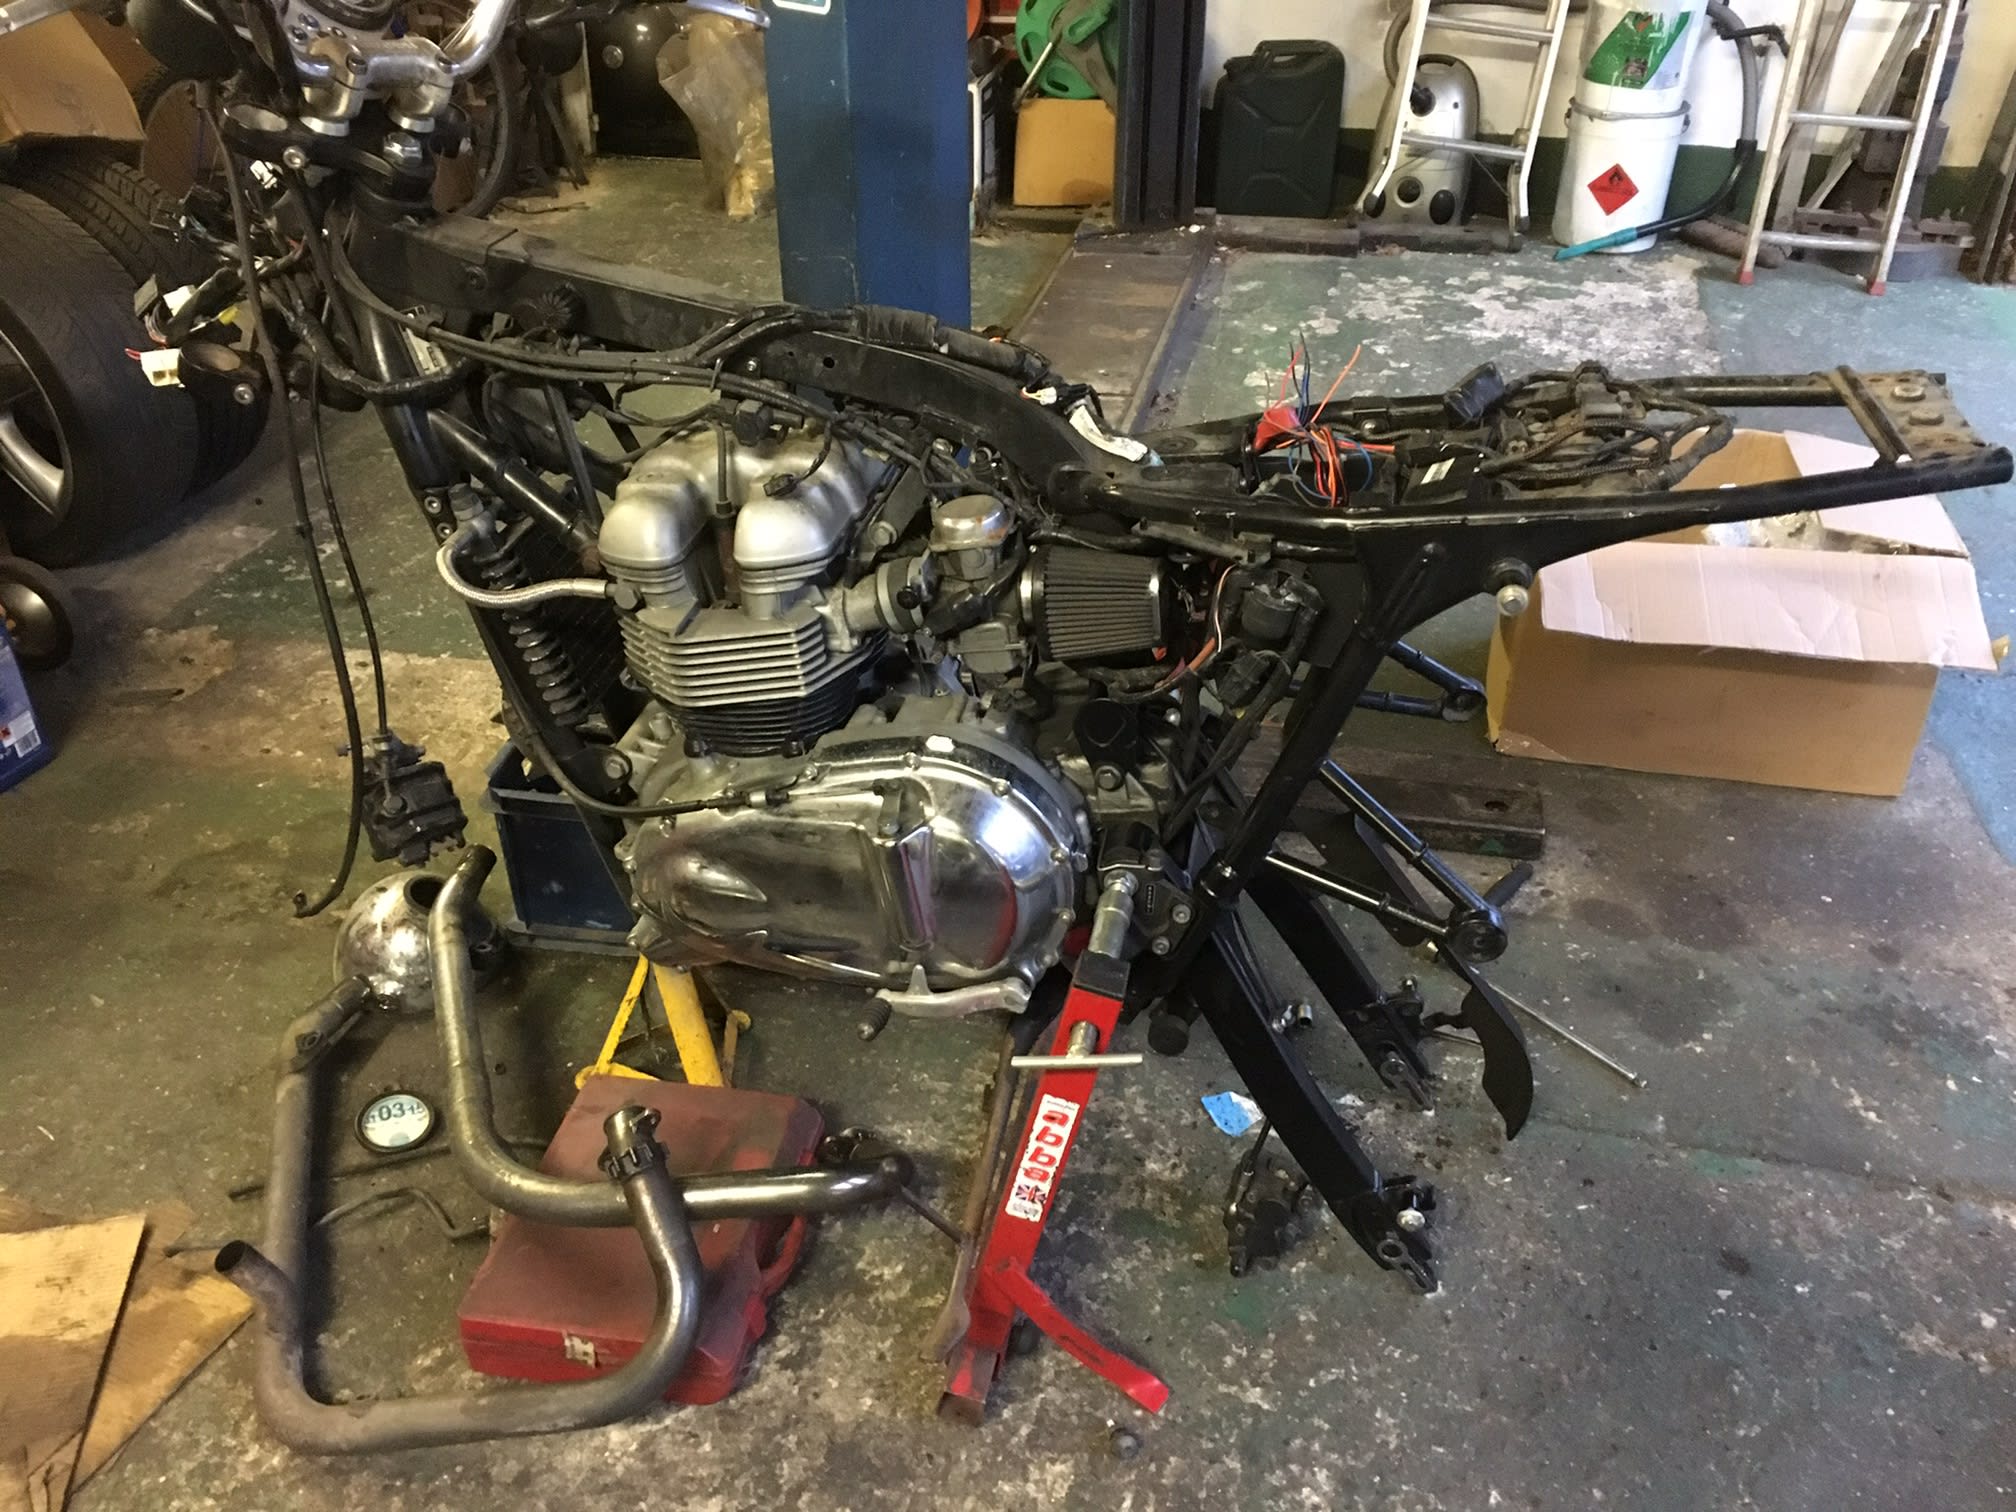 Images Motorcycle Surgery